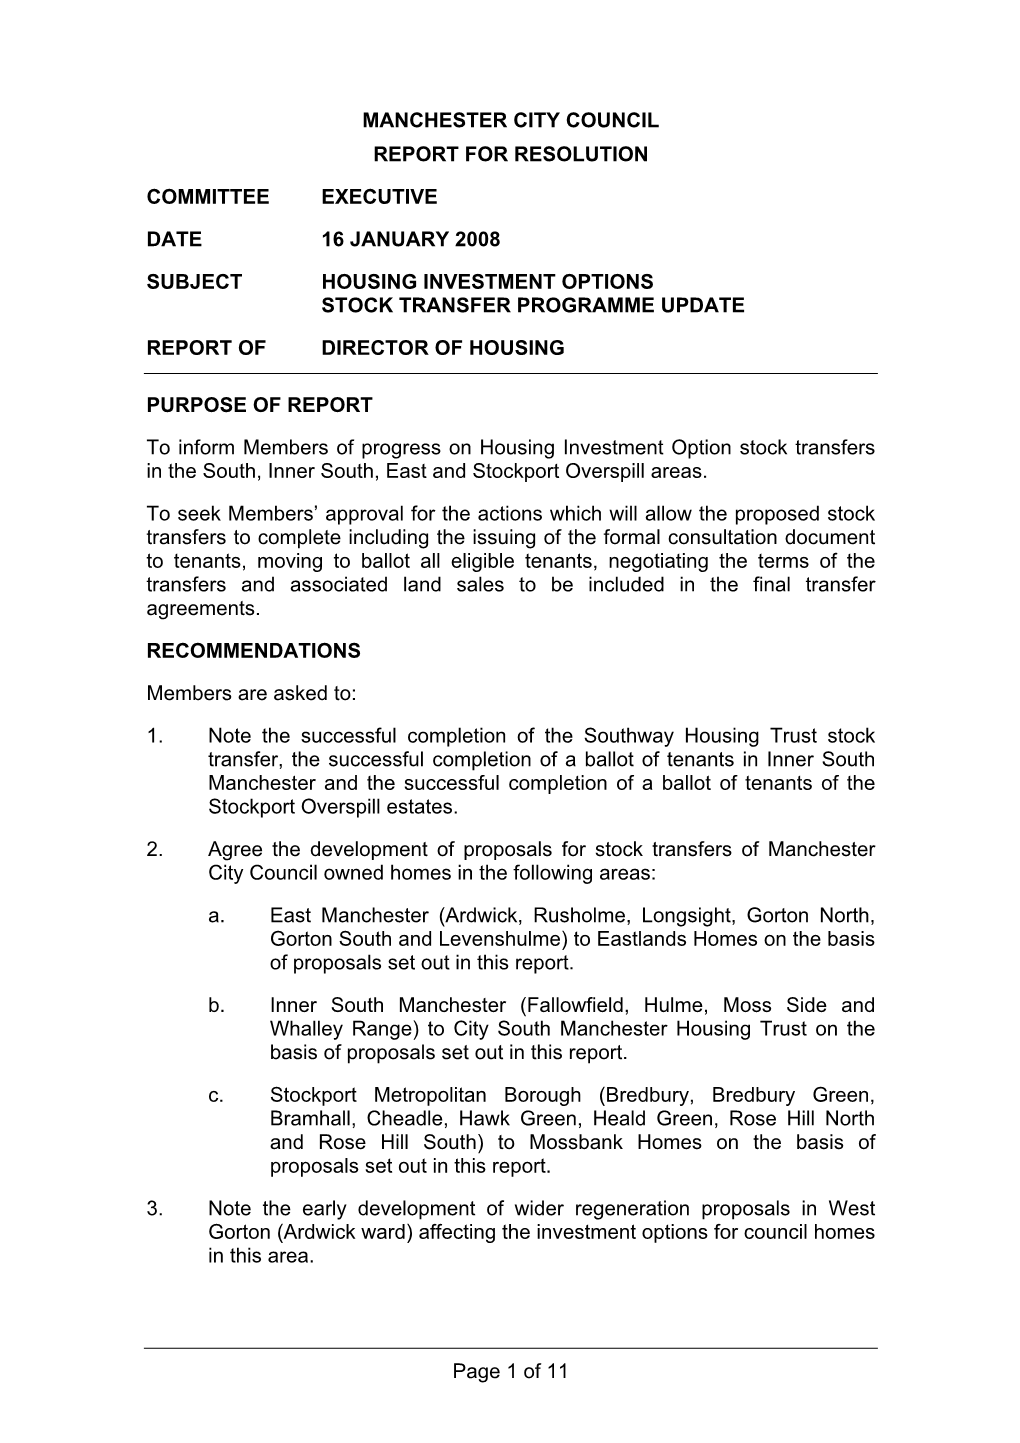 Manchester City Council Report for Resolution Committee Executive Date 16 January 2008 Subject Housing Investment Options Stock